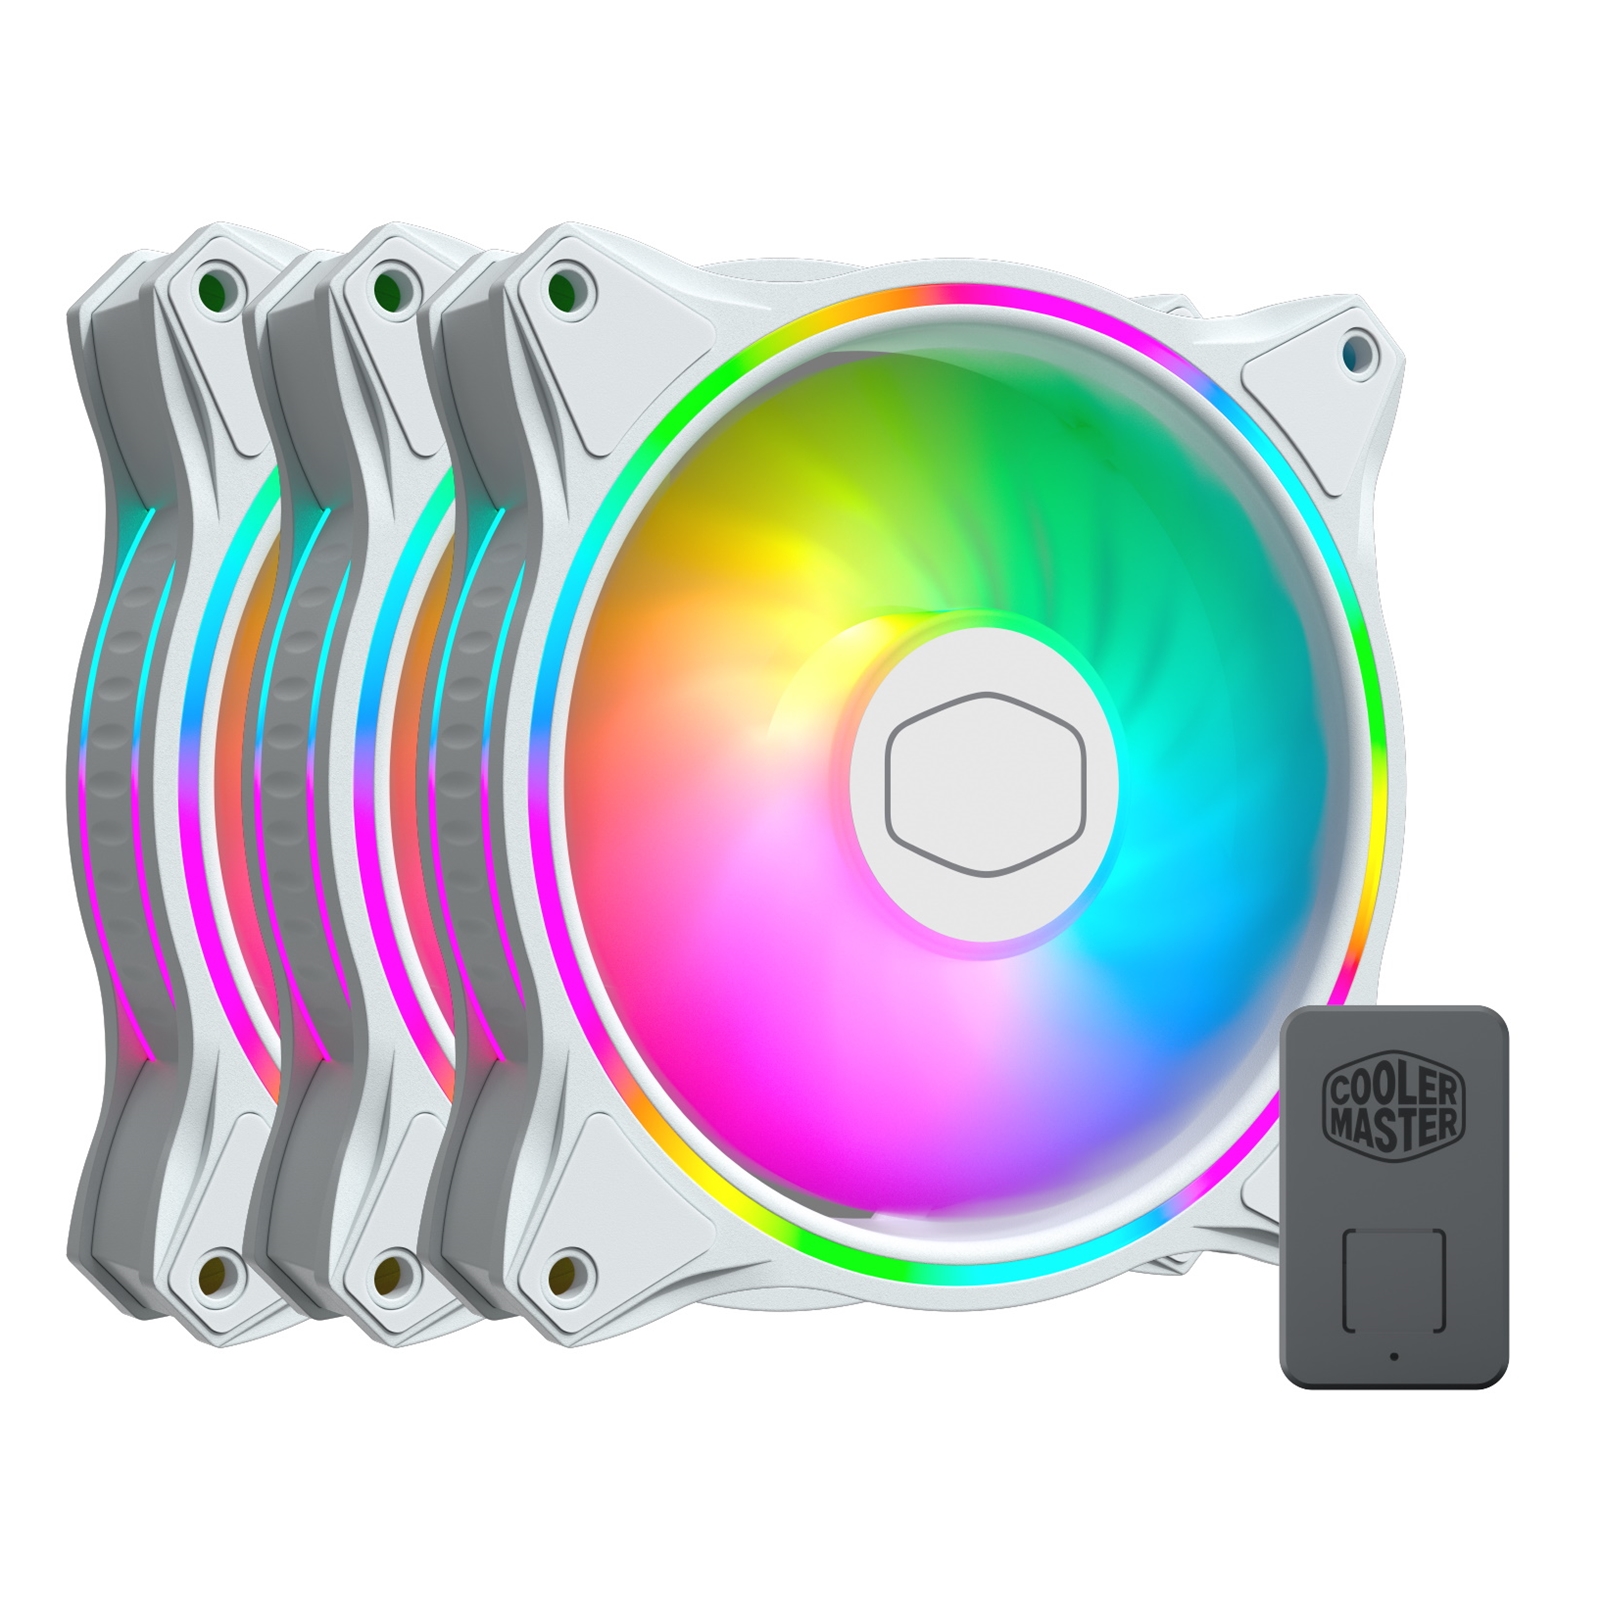 COOLER MASTER MasterFan MF120 Halo 3-in-1 White Edition Fan Pack, 120mm, 1800RPM, 4-Pin PWM Fan & 3-Pin ARGB Connectors, Dual Loop Addressable Gen 2 RGB Lighting, Addressable Gen 2 RGB Controller Included